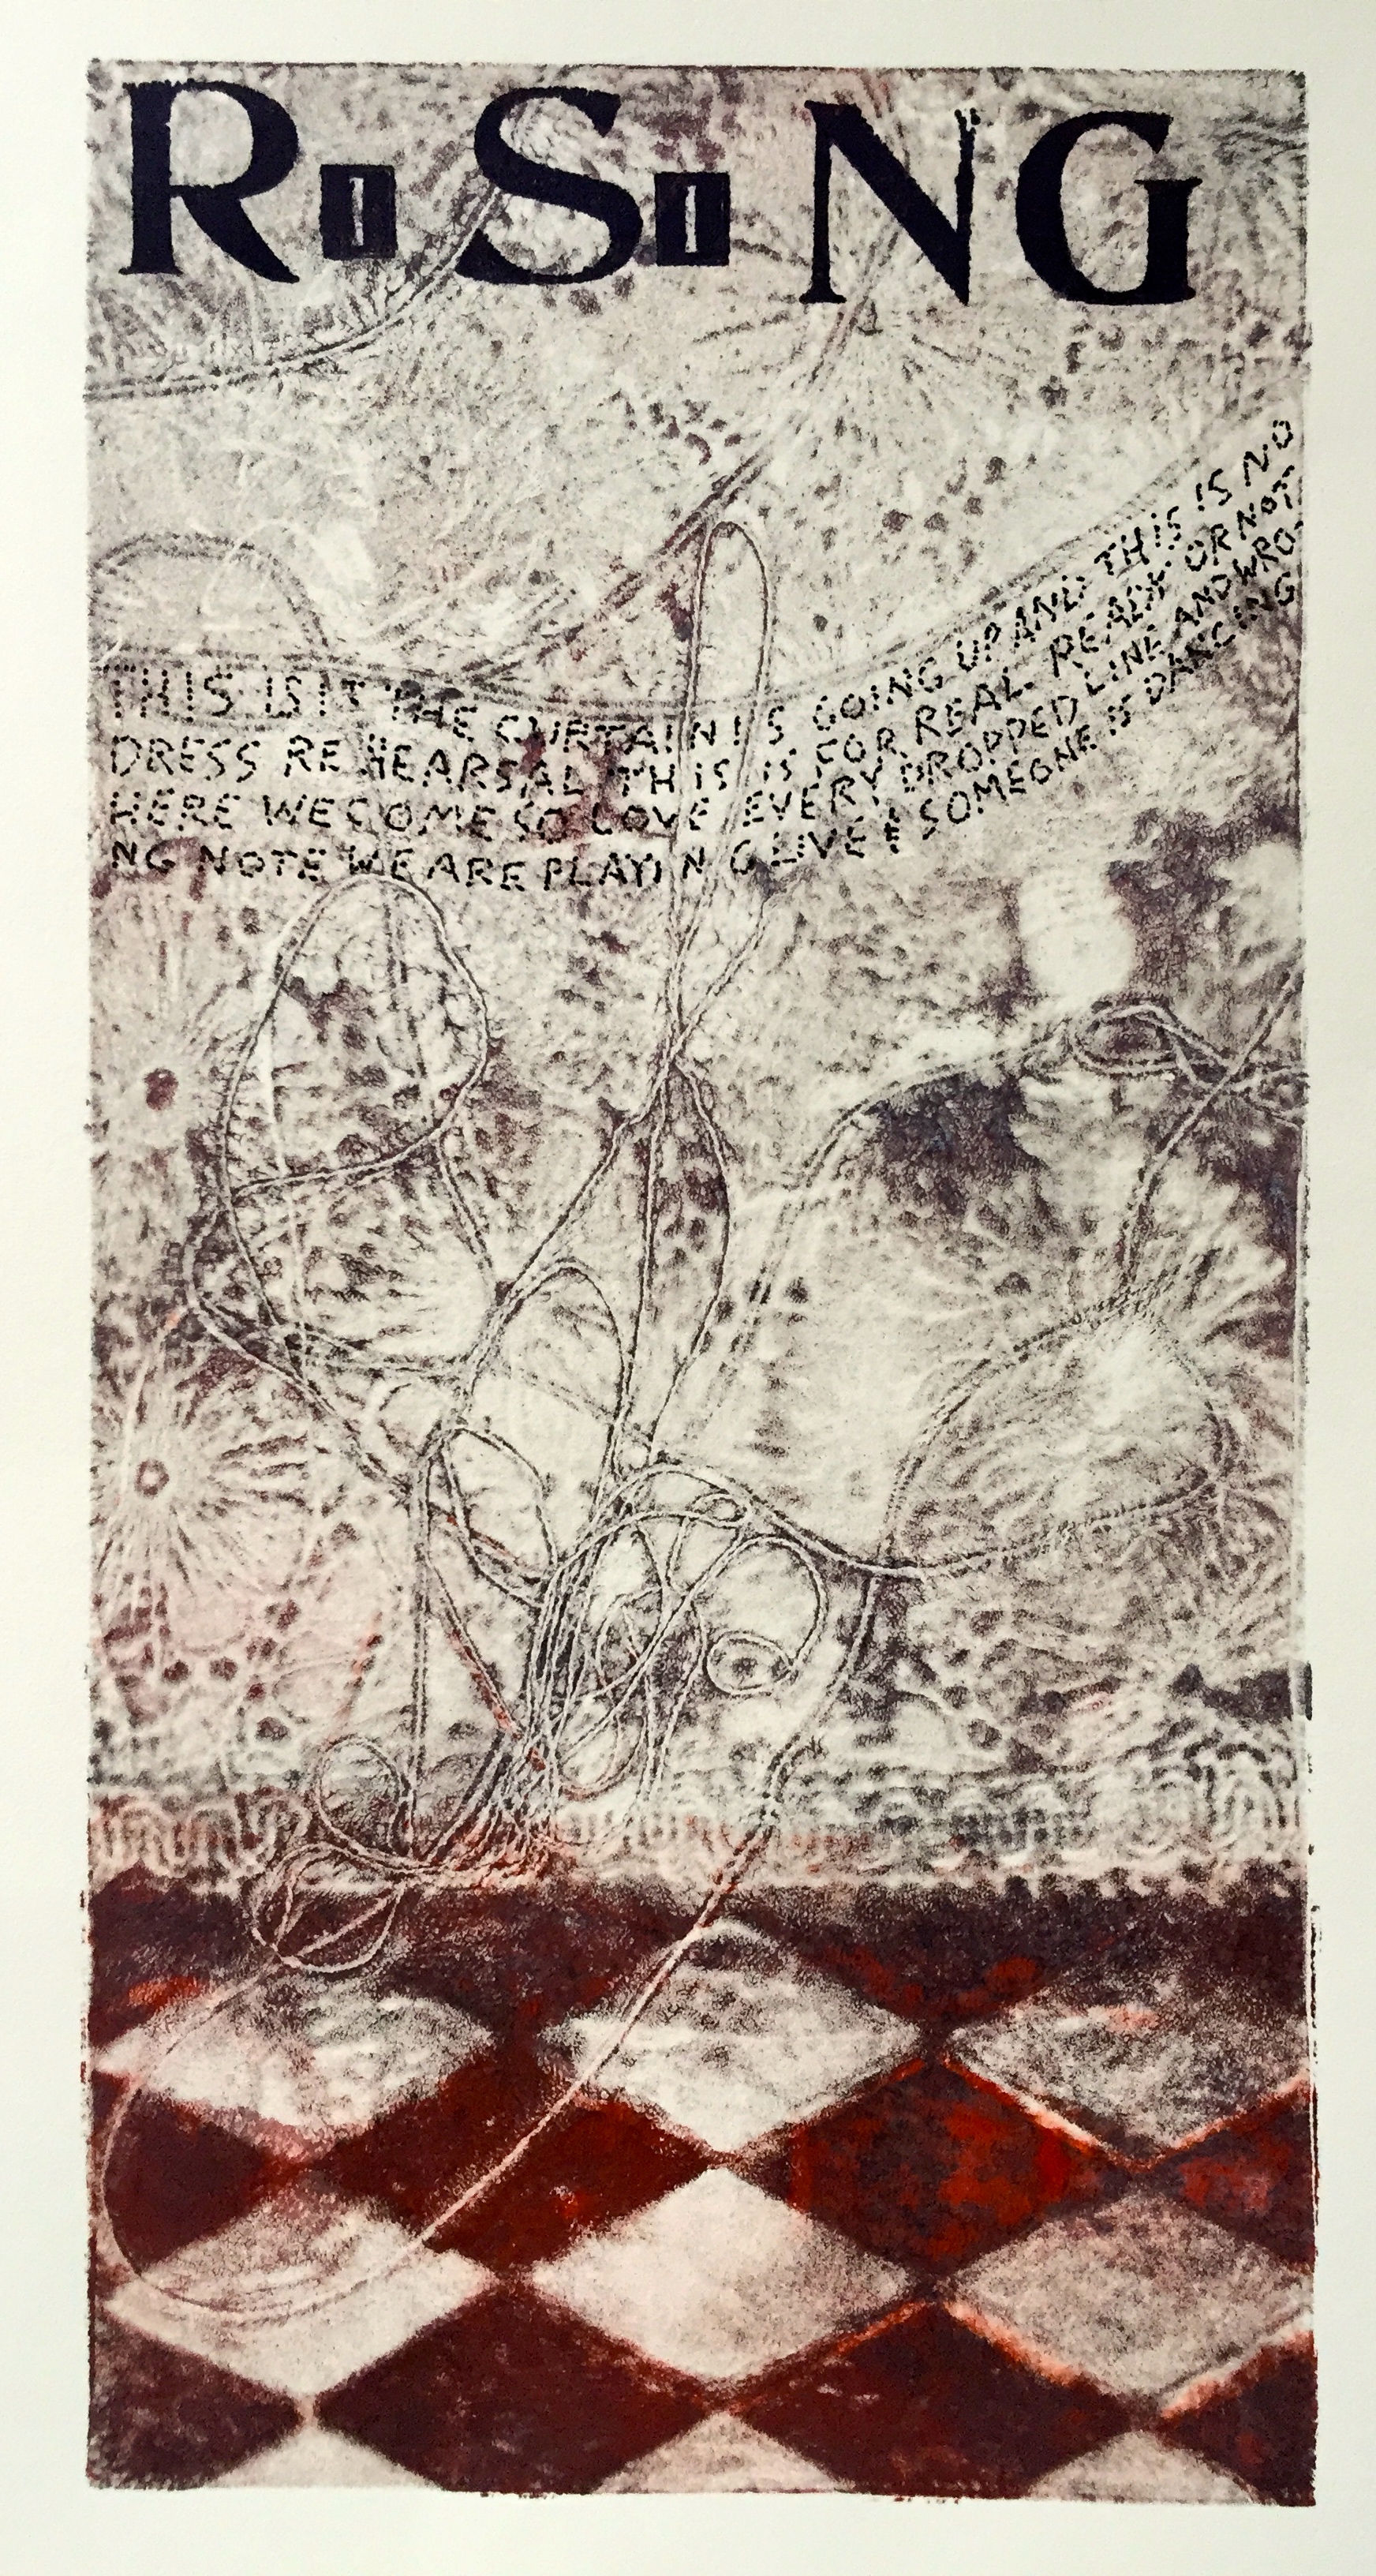   Rising   6 x 12 inches  mixed media  image: Susan Webster  hand written and stamped&nbsp;text: Stuart Kestenbaum  2015 